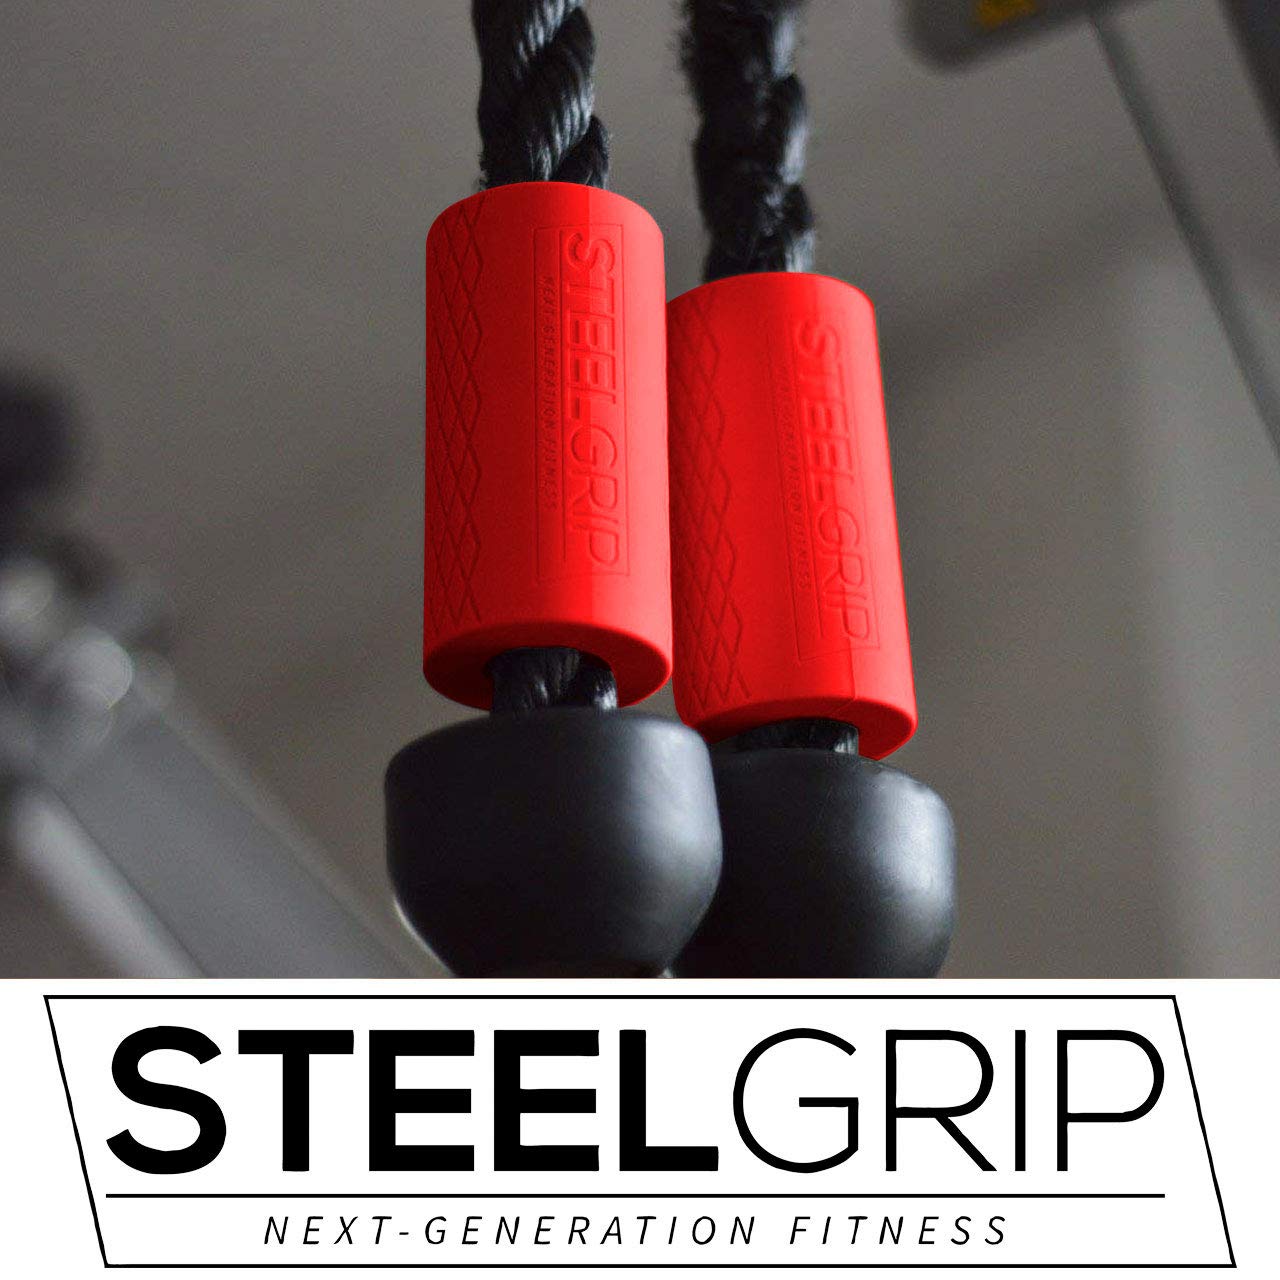 Steelgrip Thick Bar Grips for Dumbbell and Barbell, Thick Silicone Arm Blasters - Opticdeals